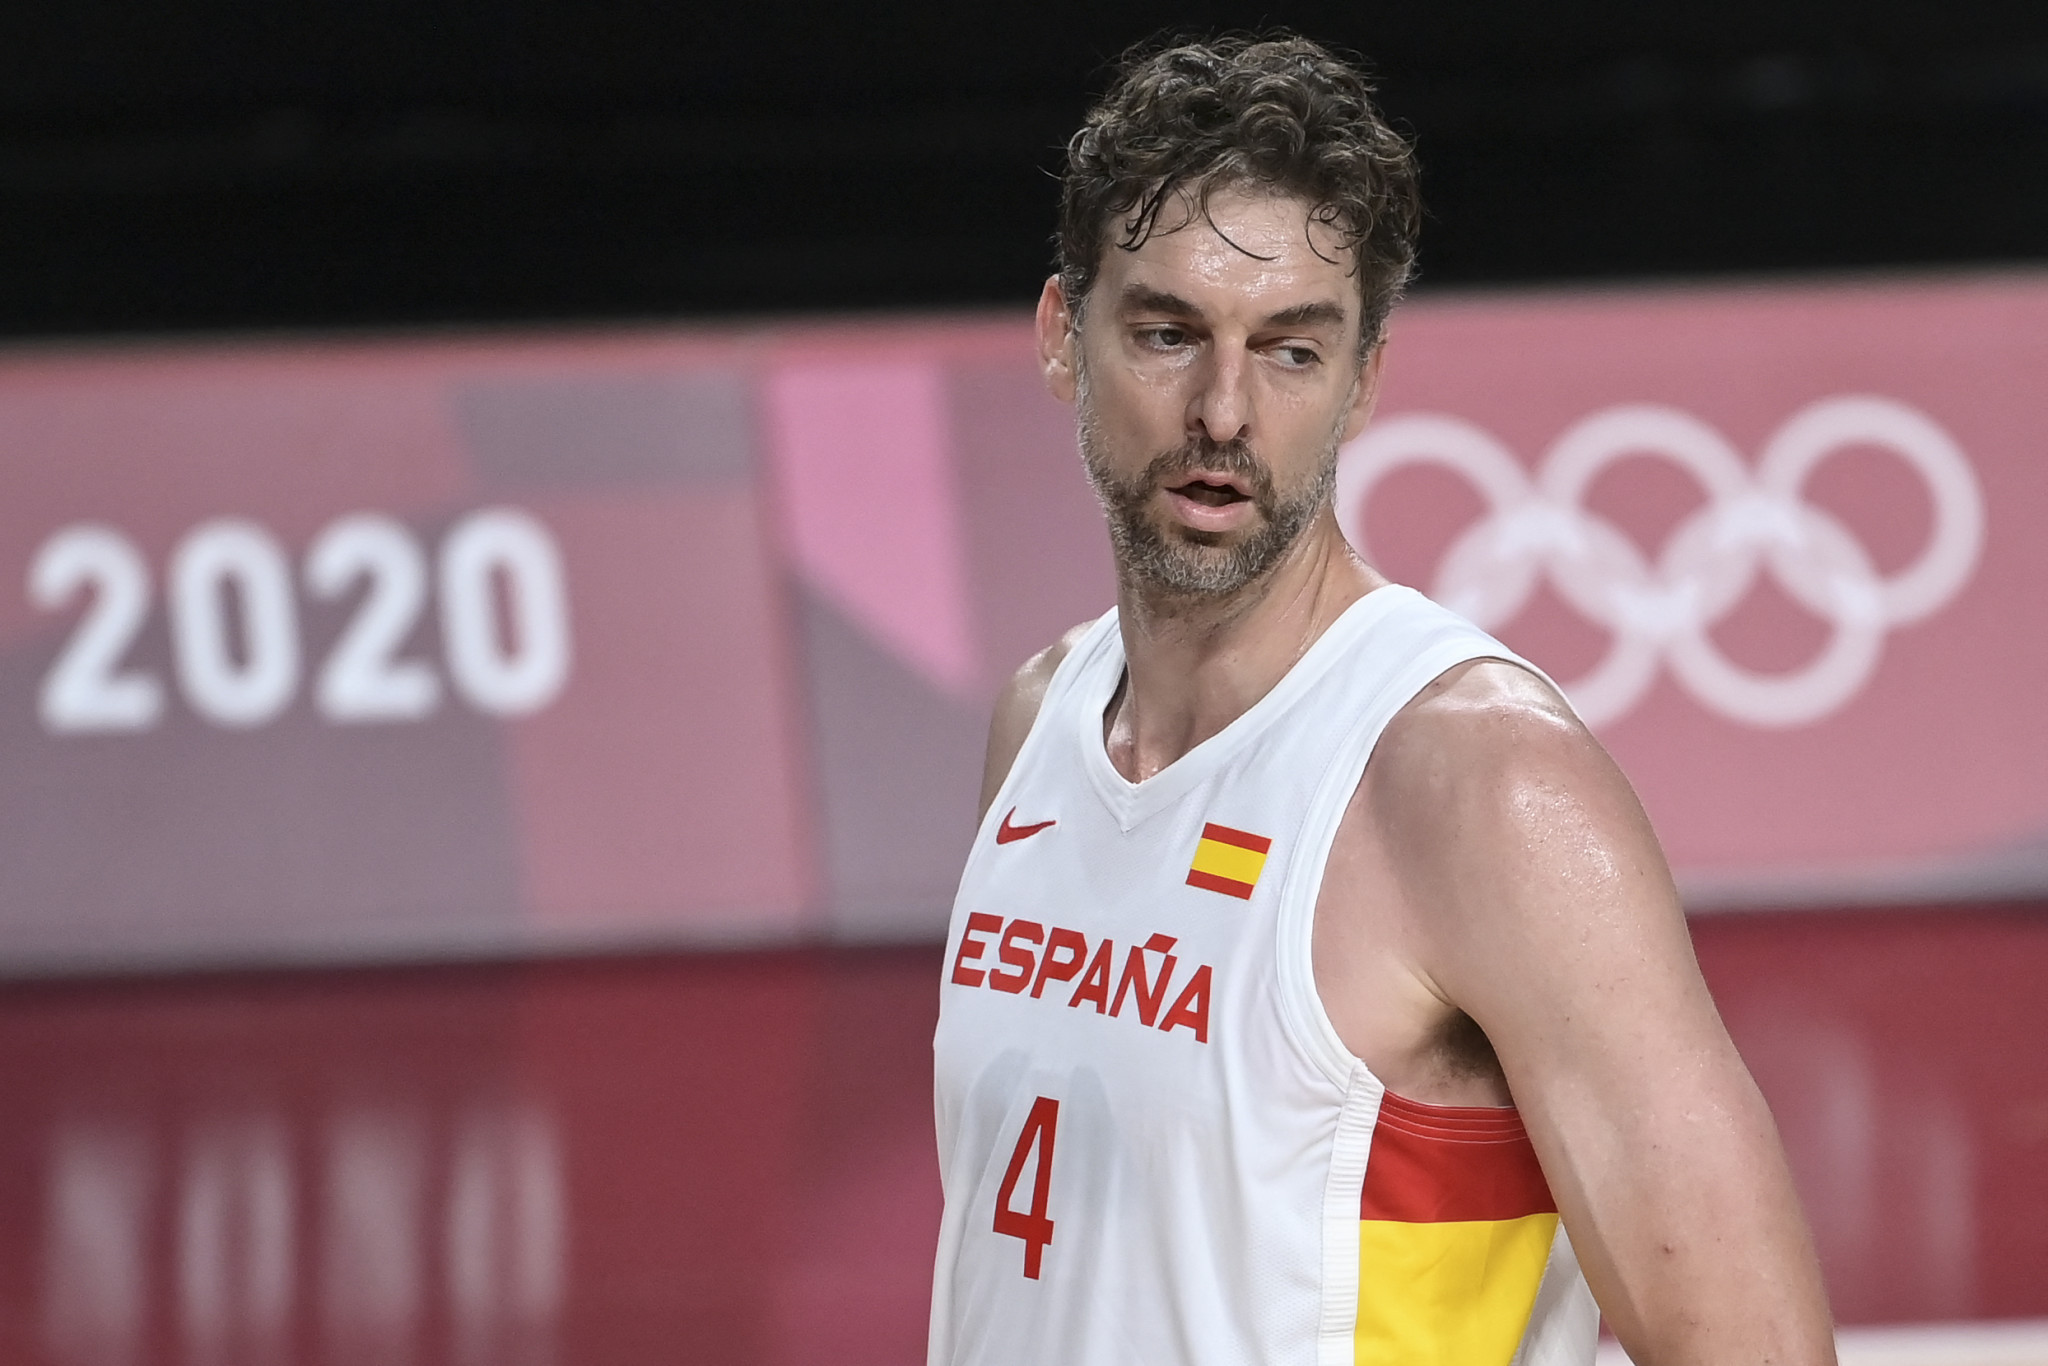 Spain's Pau Gasol Sáez was put forward for IOC Ethics Commission membership by the Athletes' Commission ©Getty Images